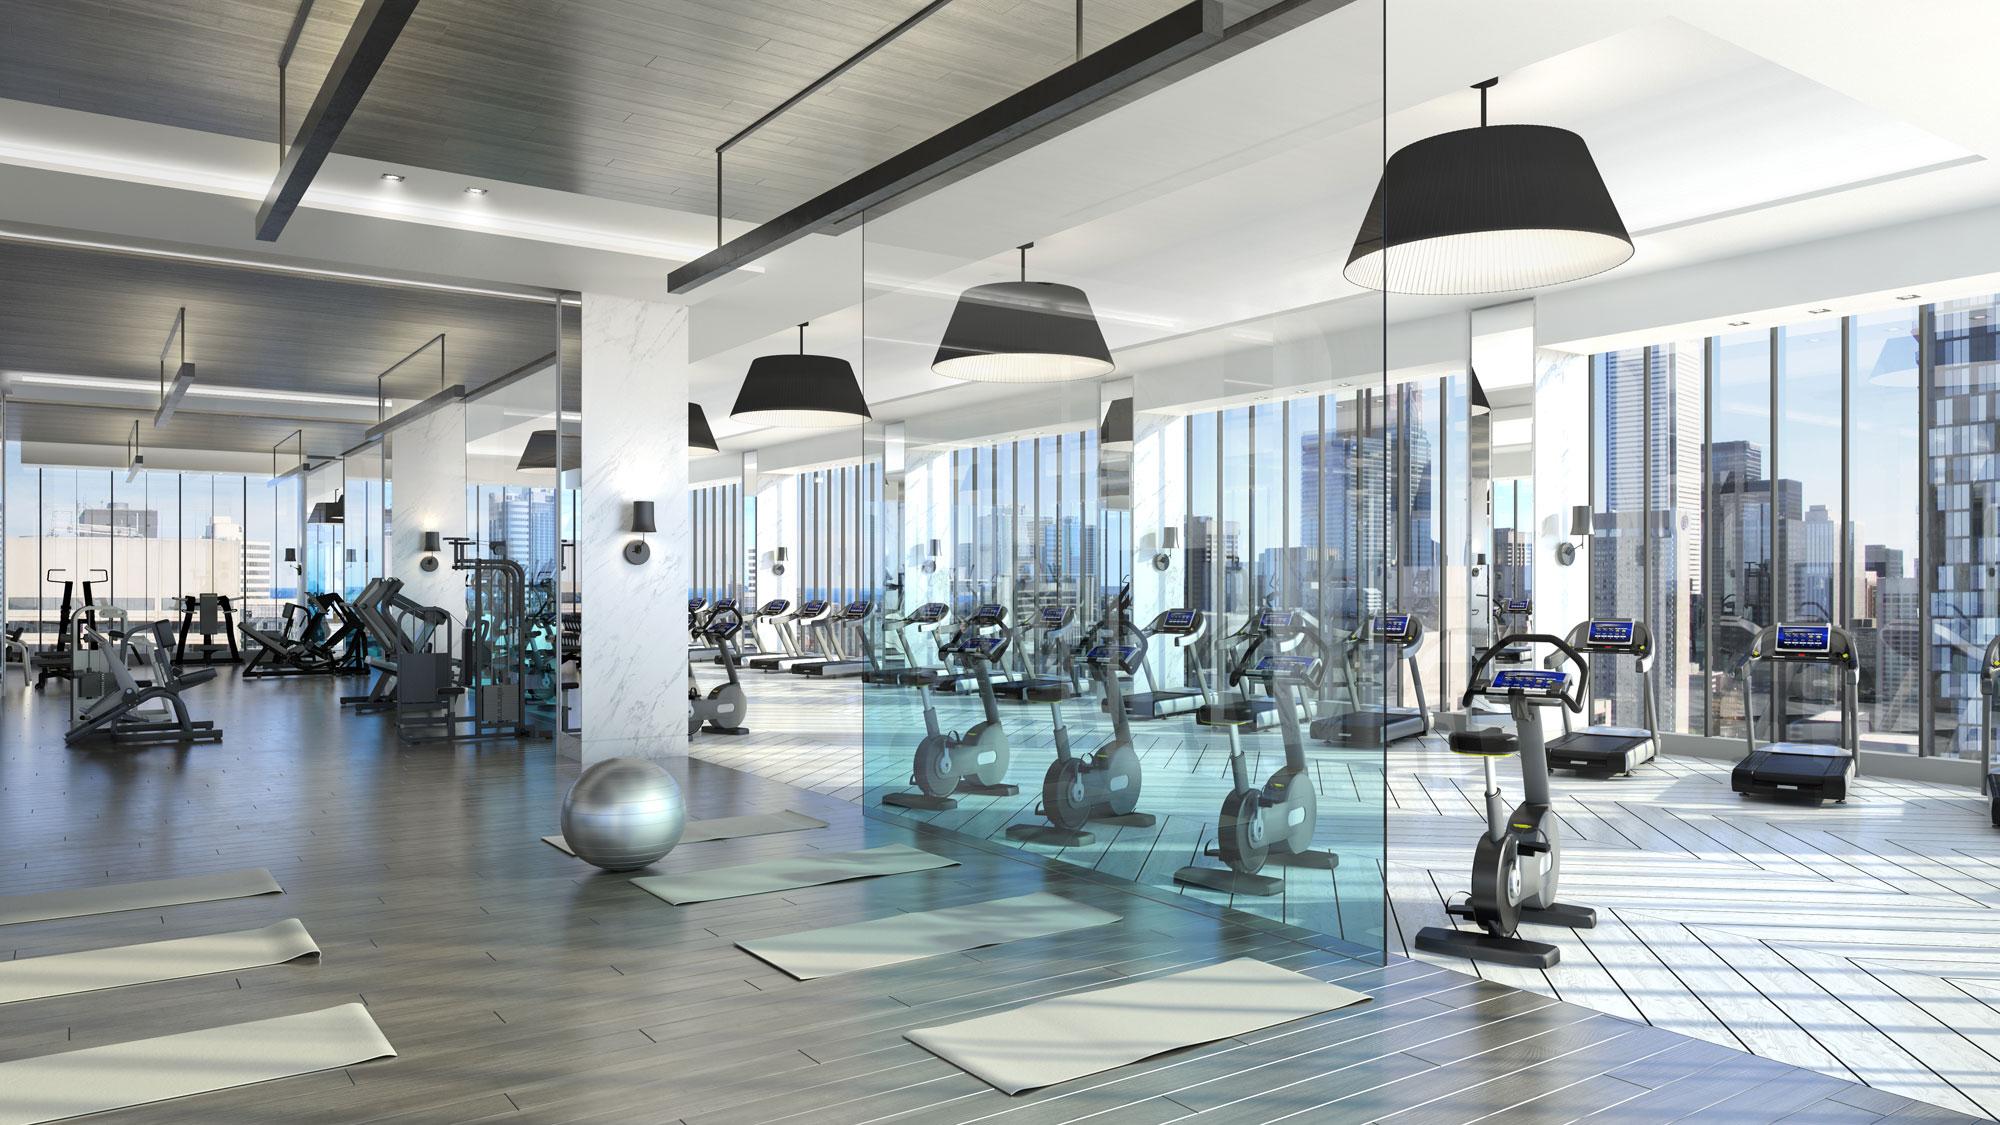 Image of gym and equipment at United Condos.